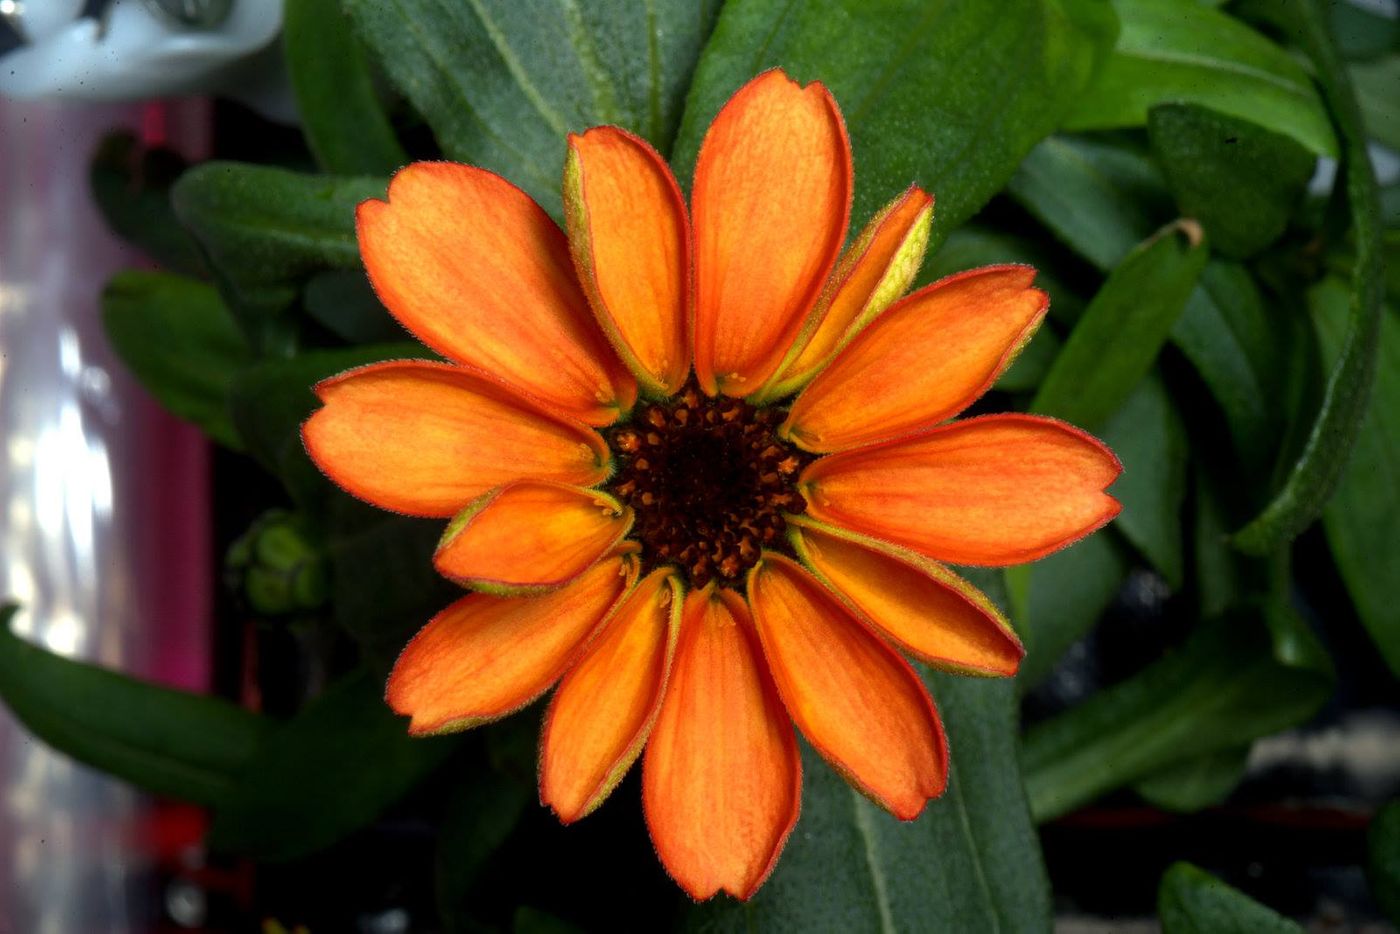 Scott Kelly shared this photo of an orange zinnia flower growing aboard the ISS.